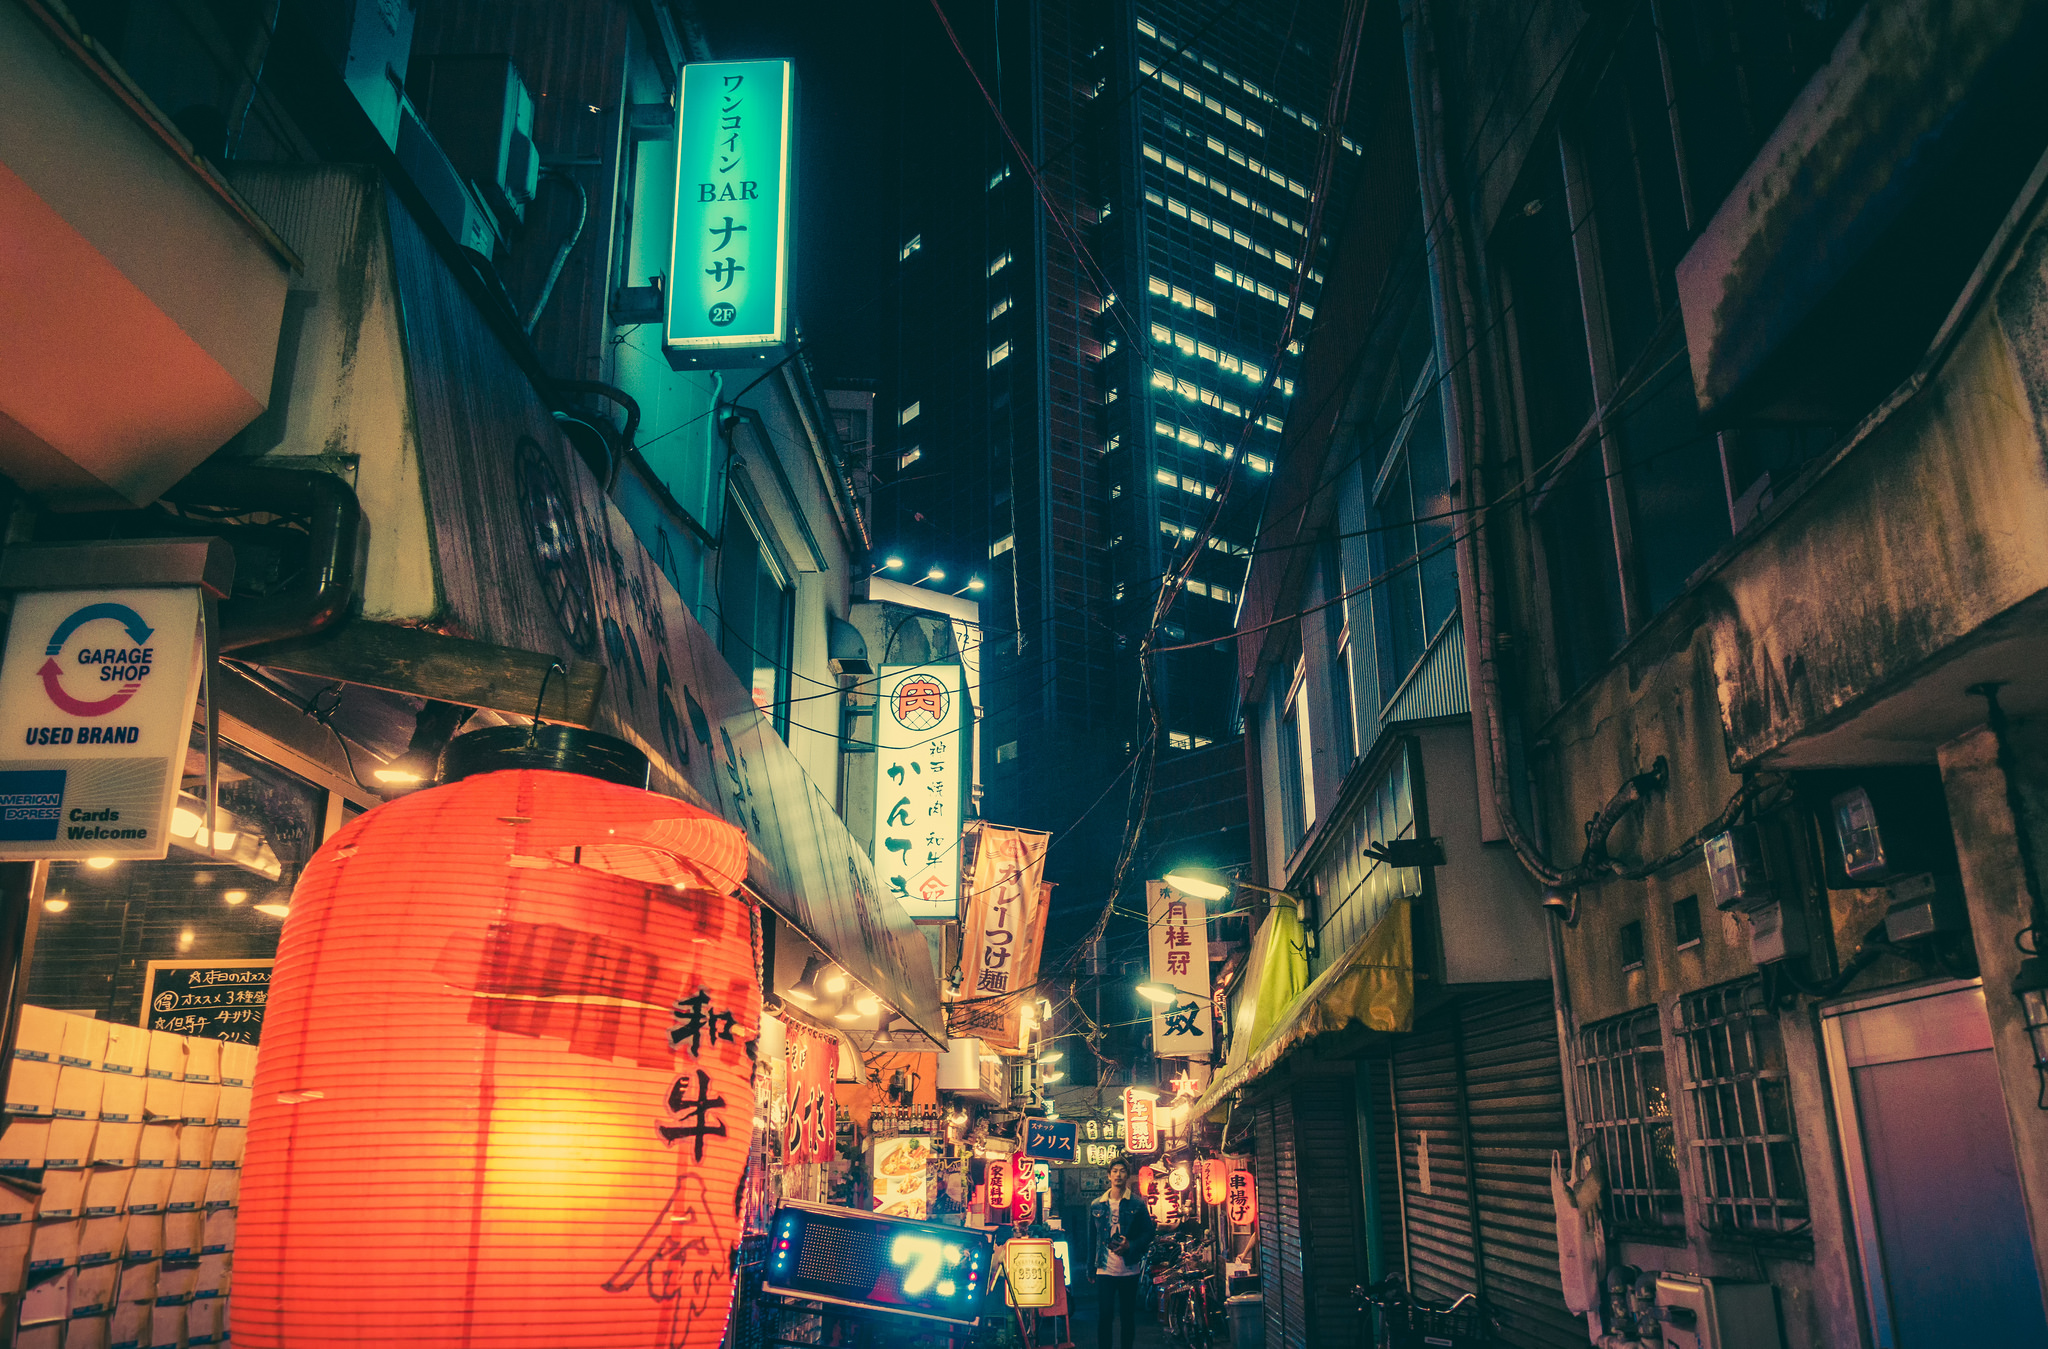 A street at night with many signs and lanterns. - Japan